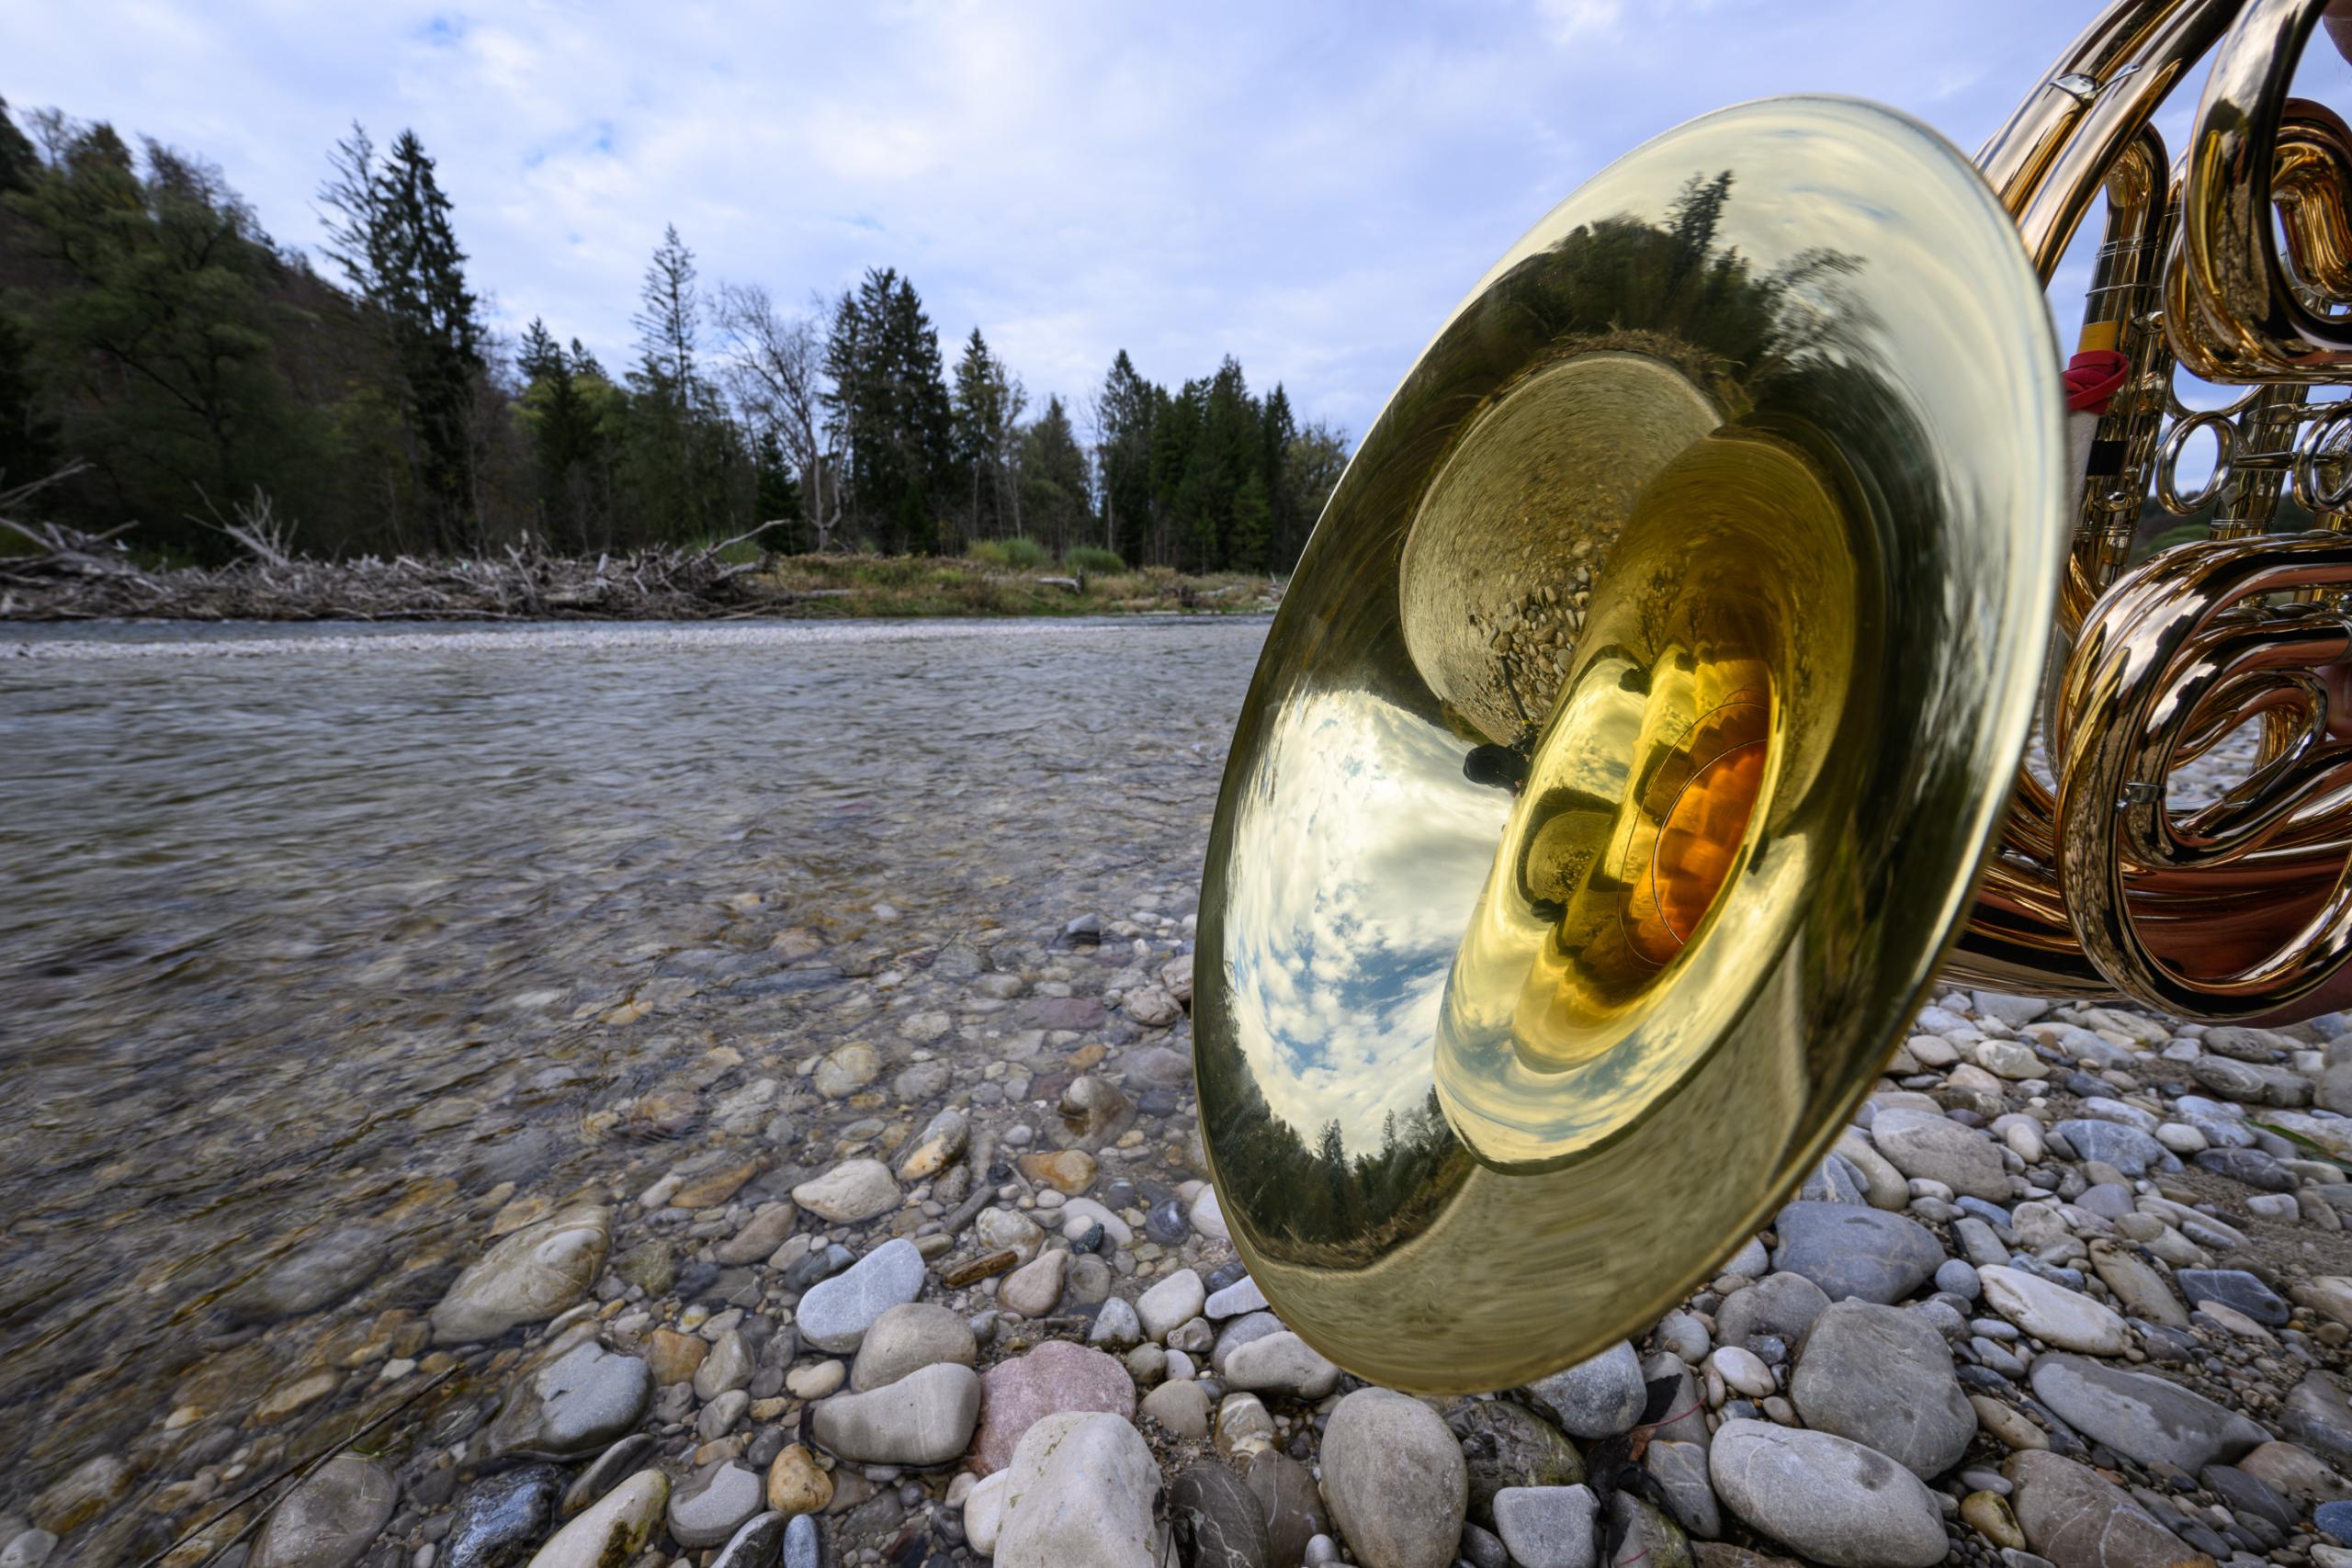 A river bank with pebbles, trees in the background. You can see a brass instrument in the foreground